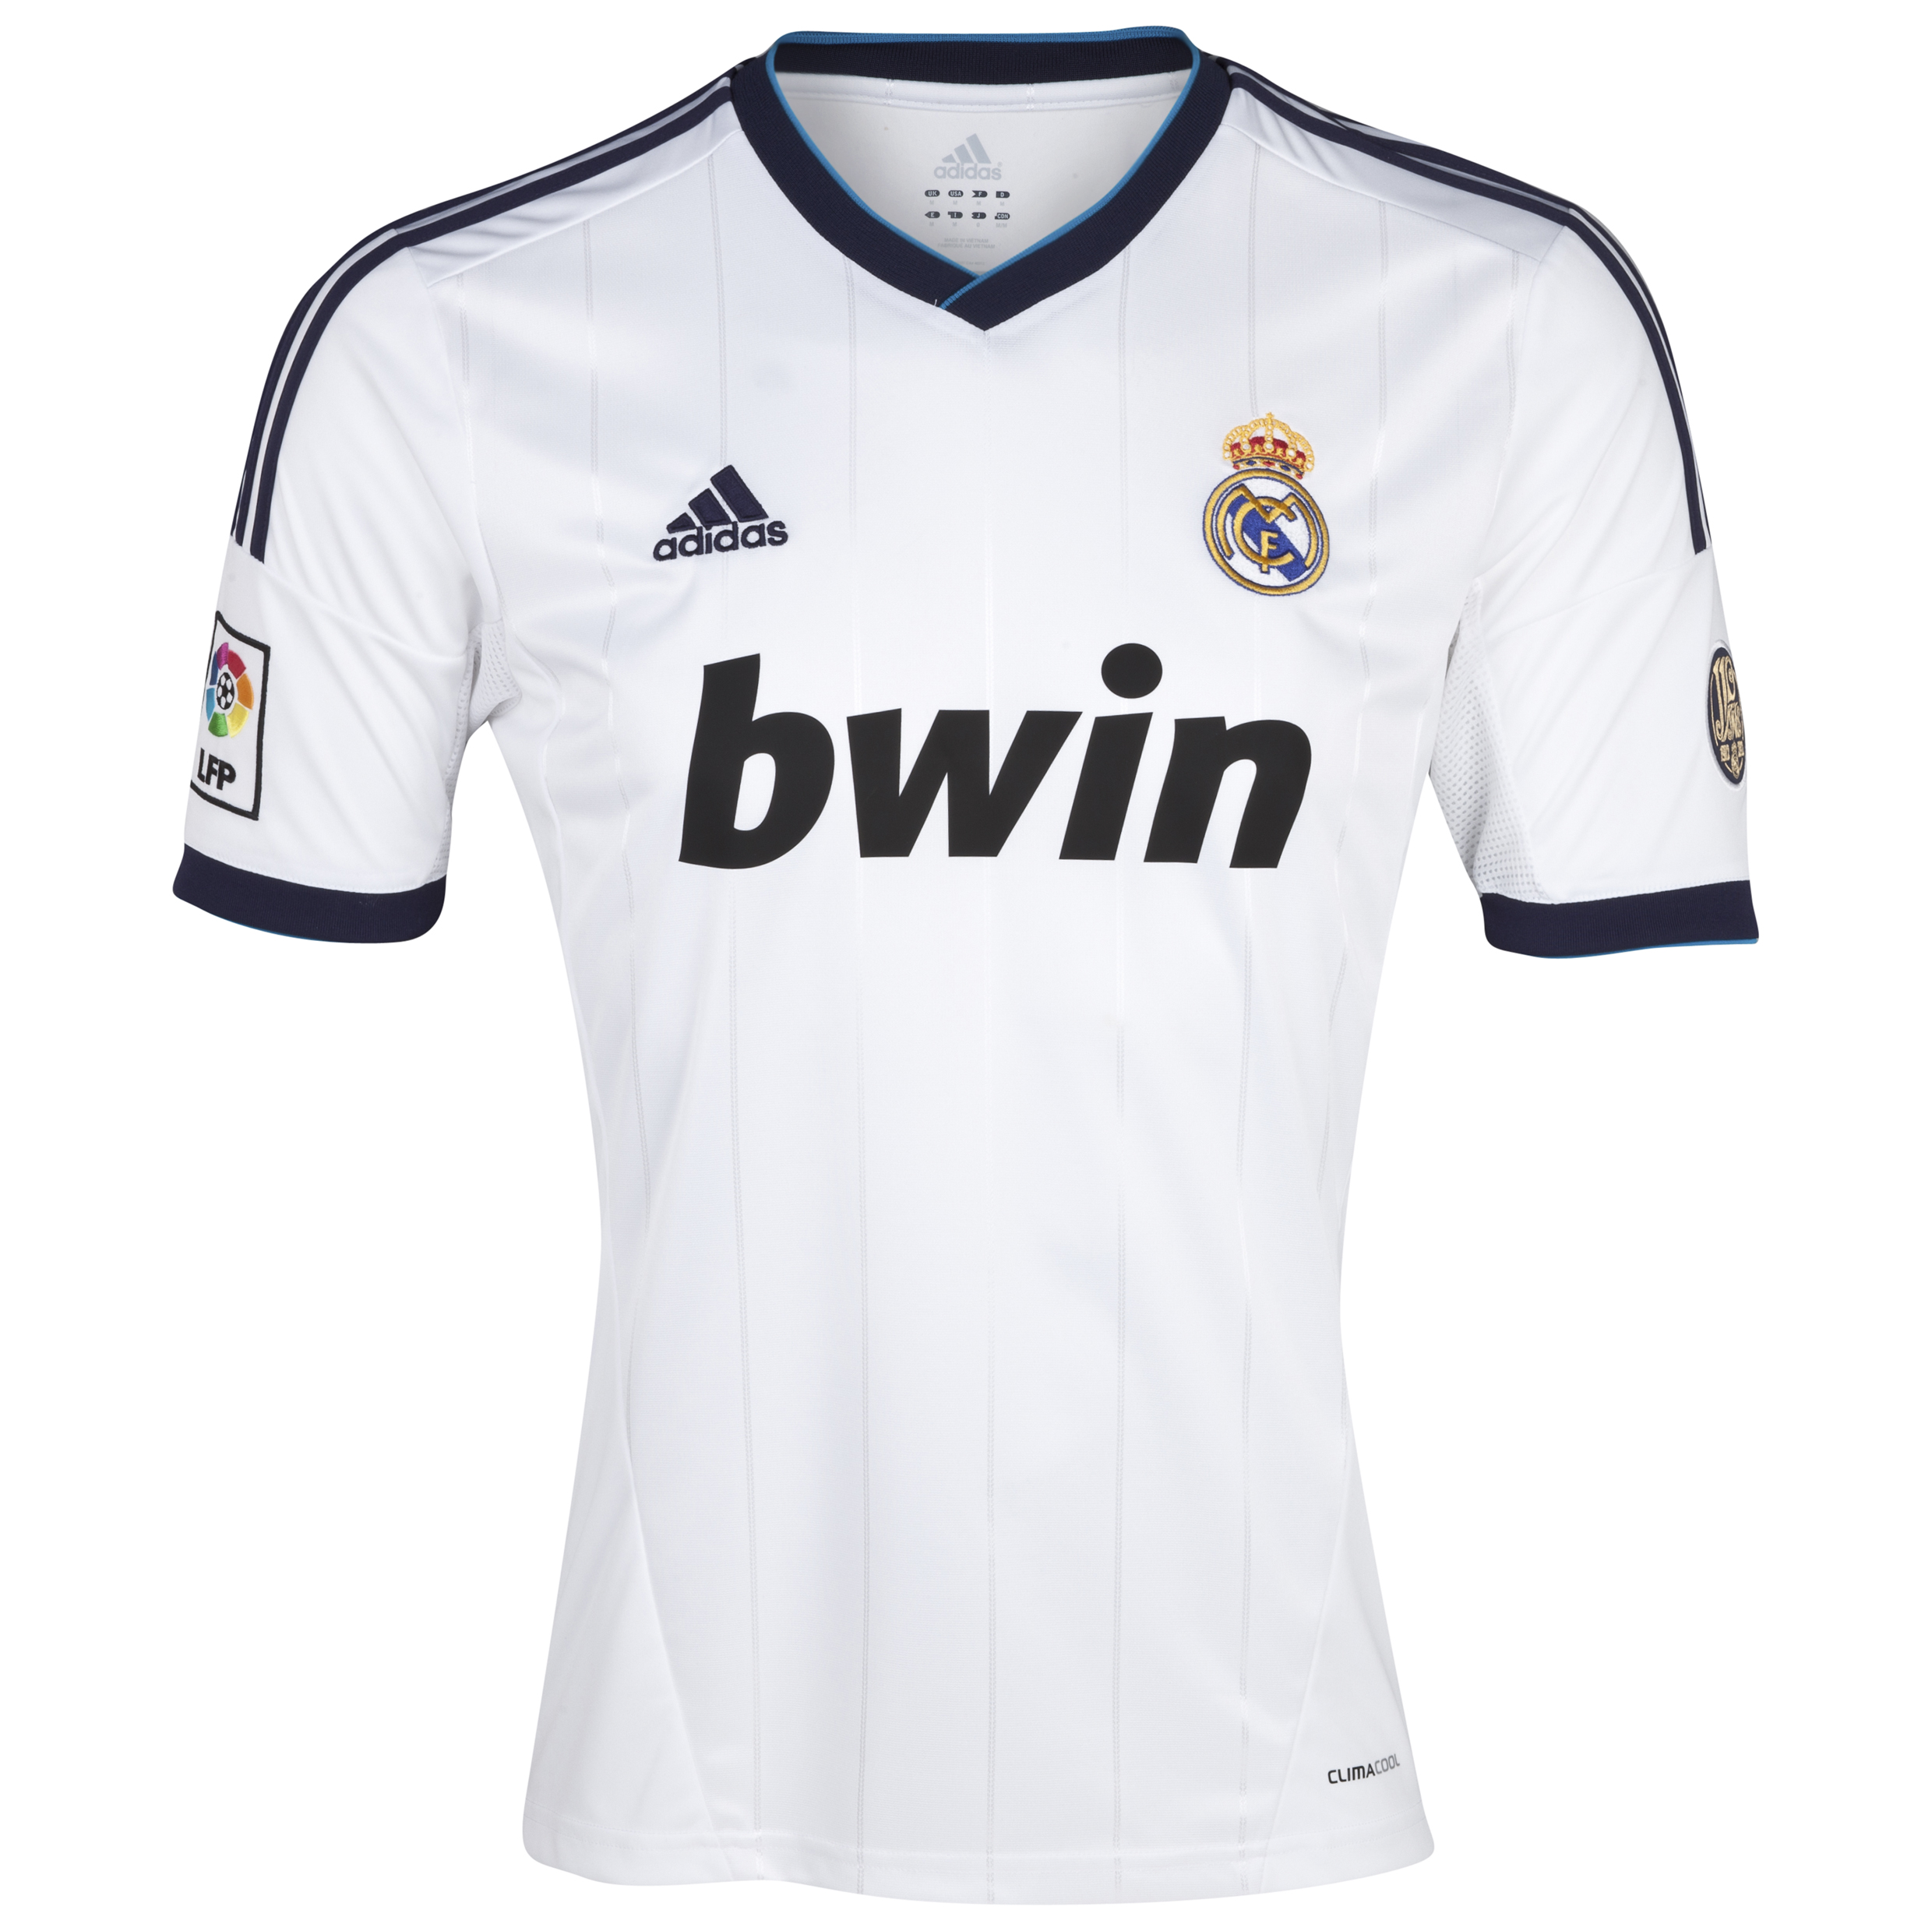 Download this Real Madrid Home Shirt picture